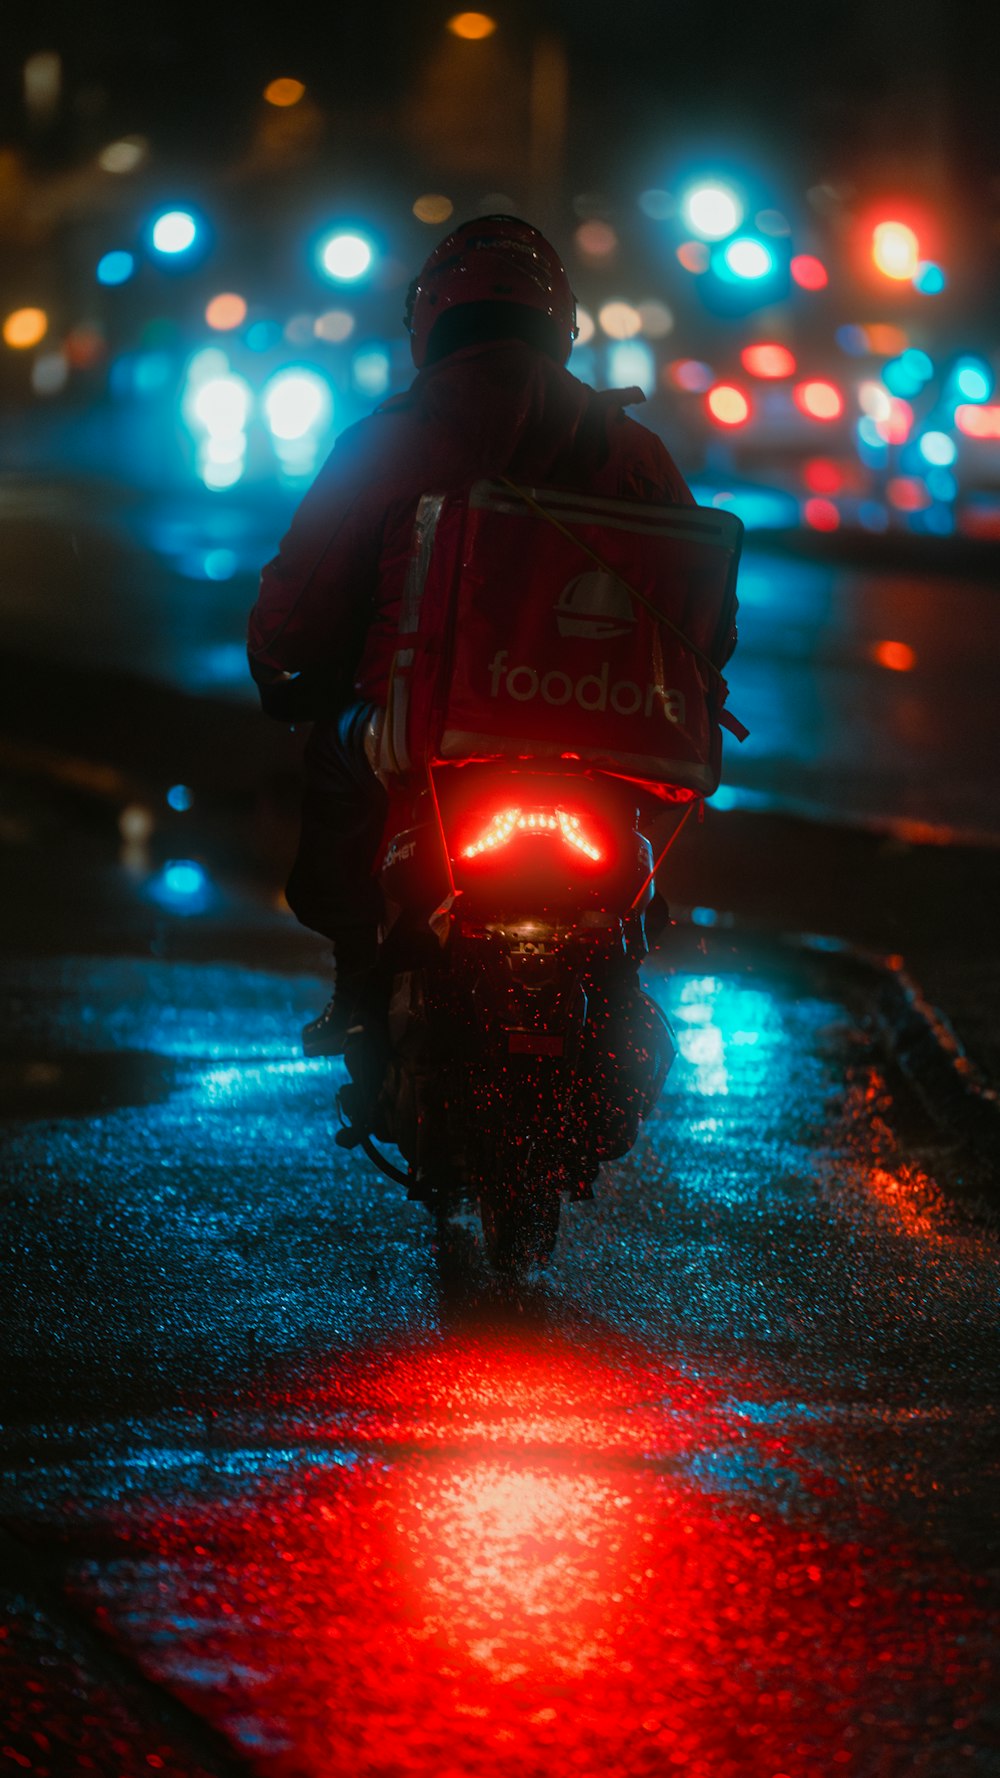 a man riding a motorcycle down a street at night